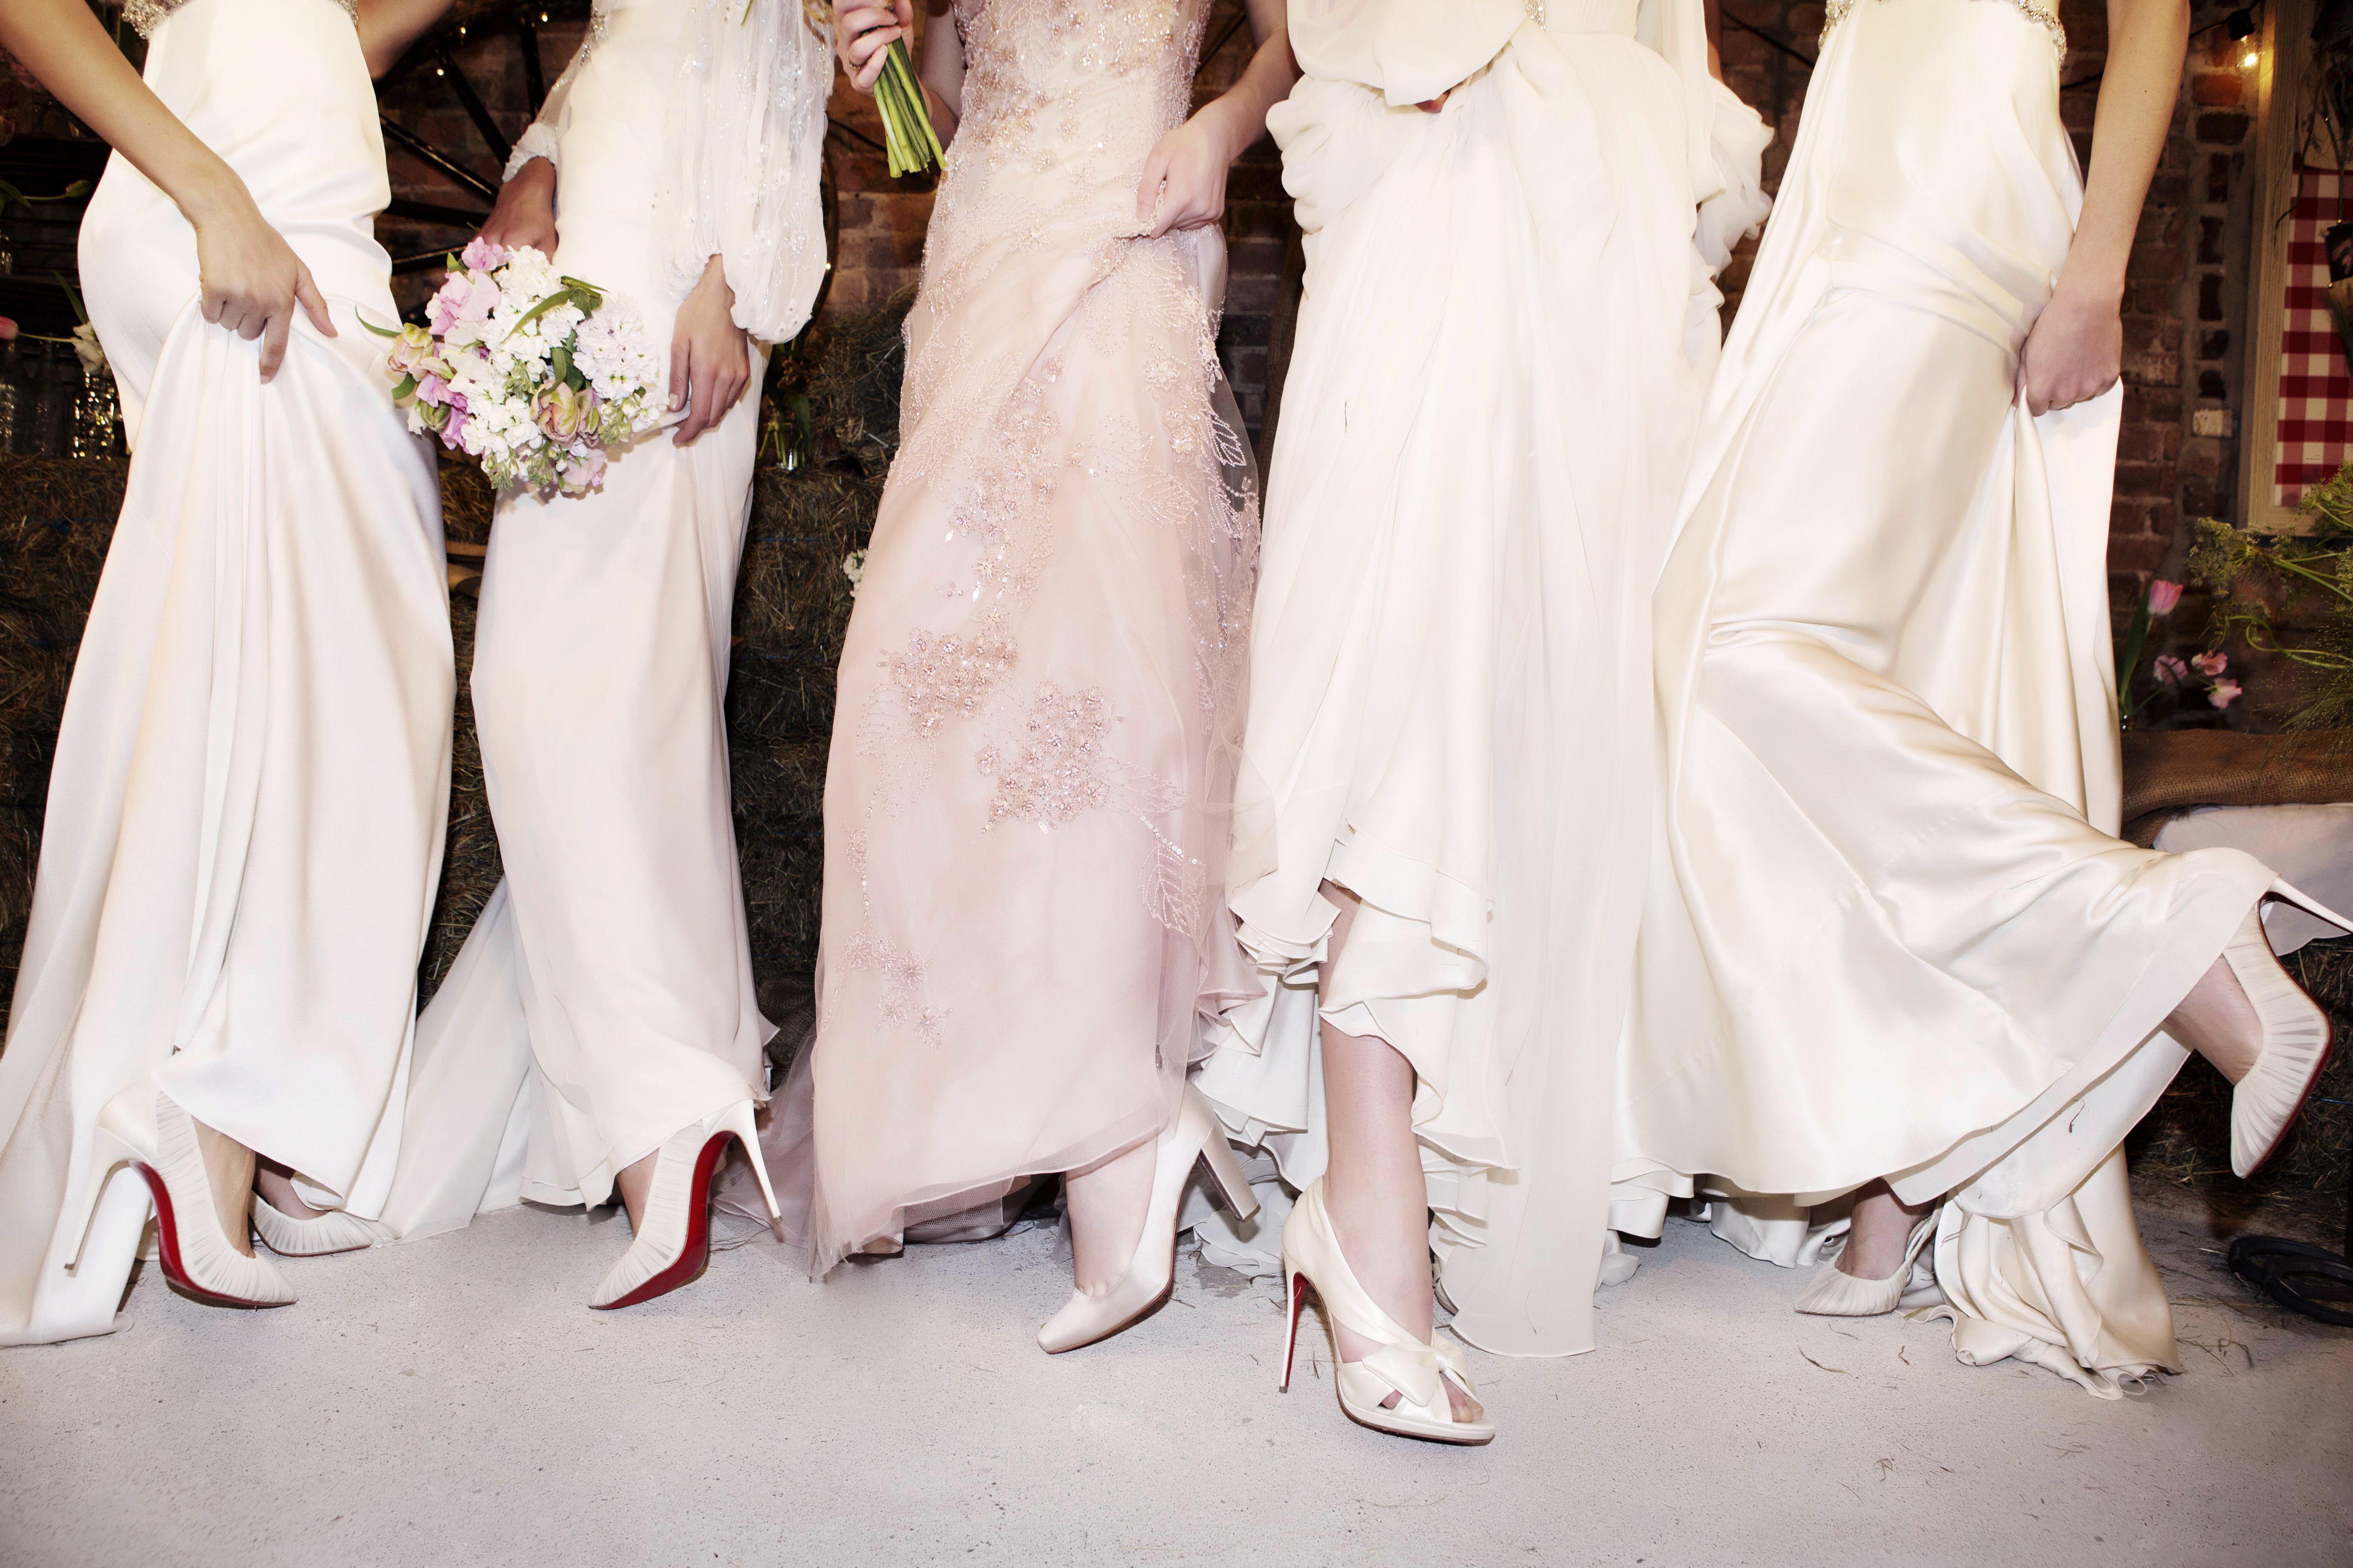 Christian Louboutin Bridal Shoes Collection 